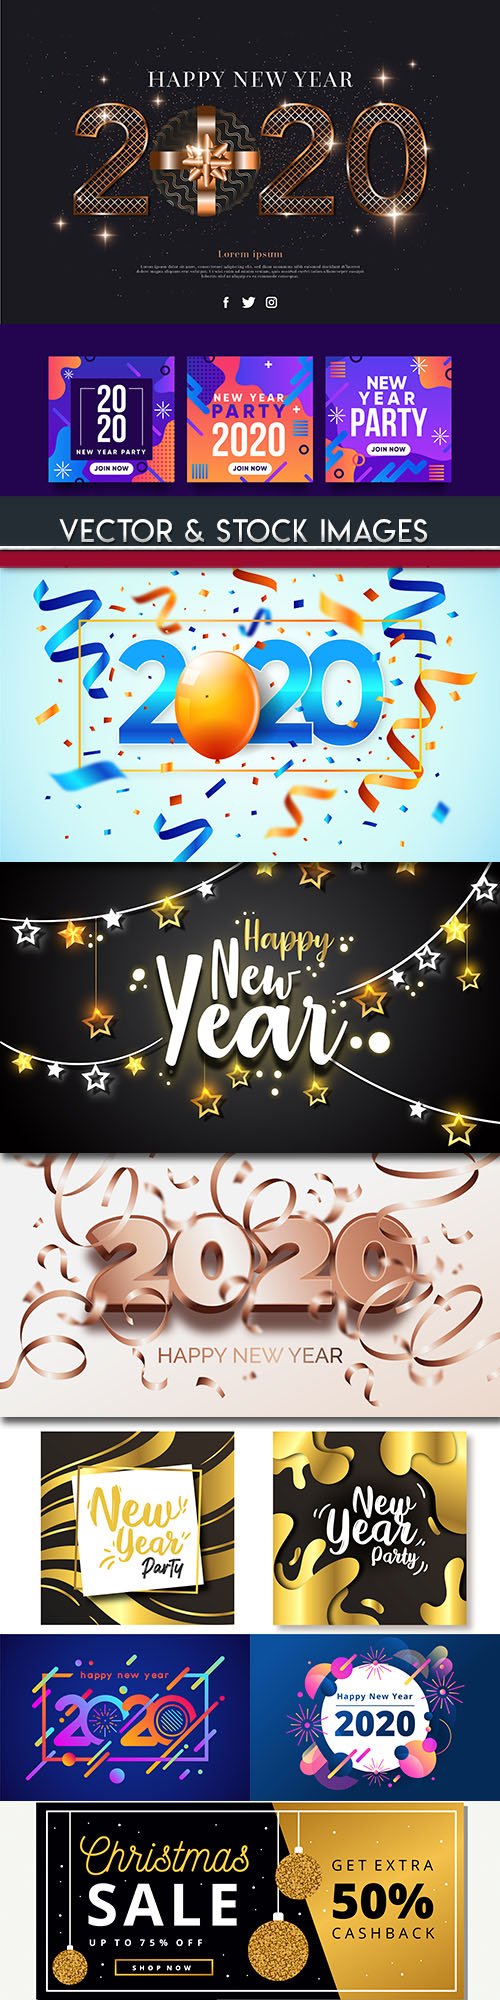 New Year and Christmas decorative 2020 illustration 14